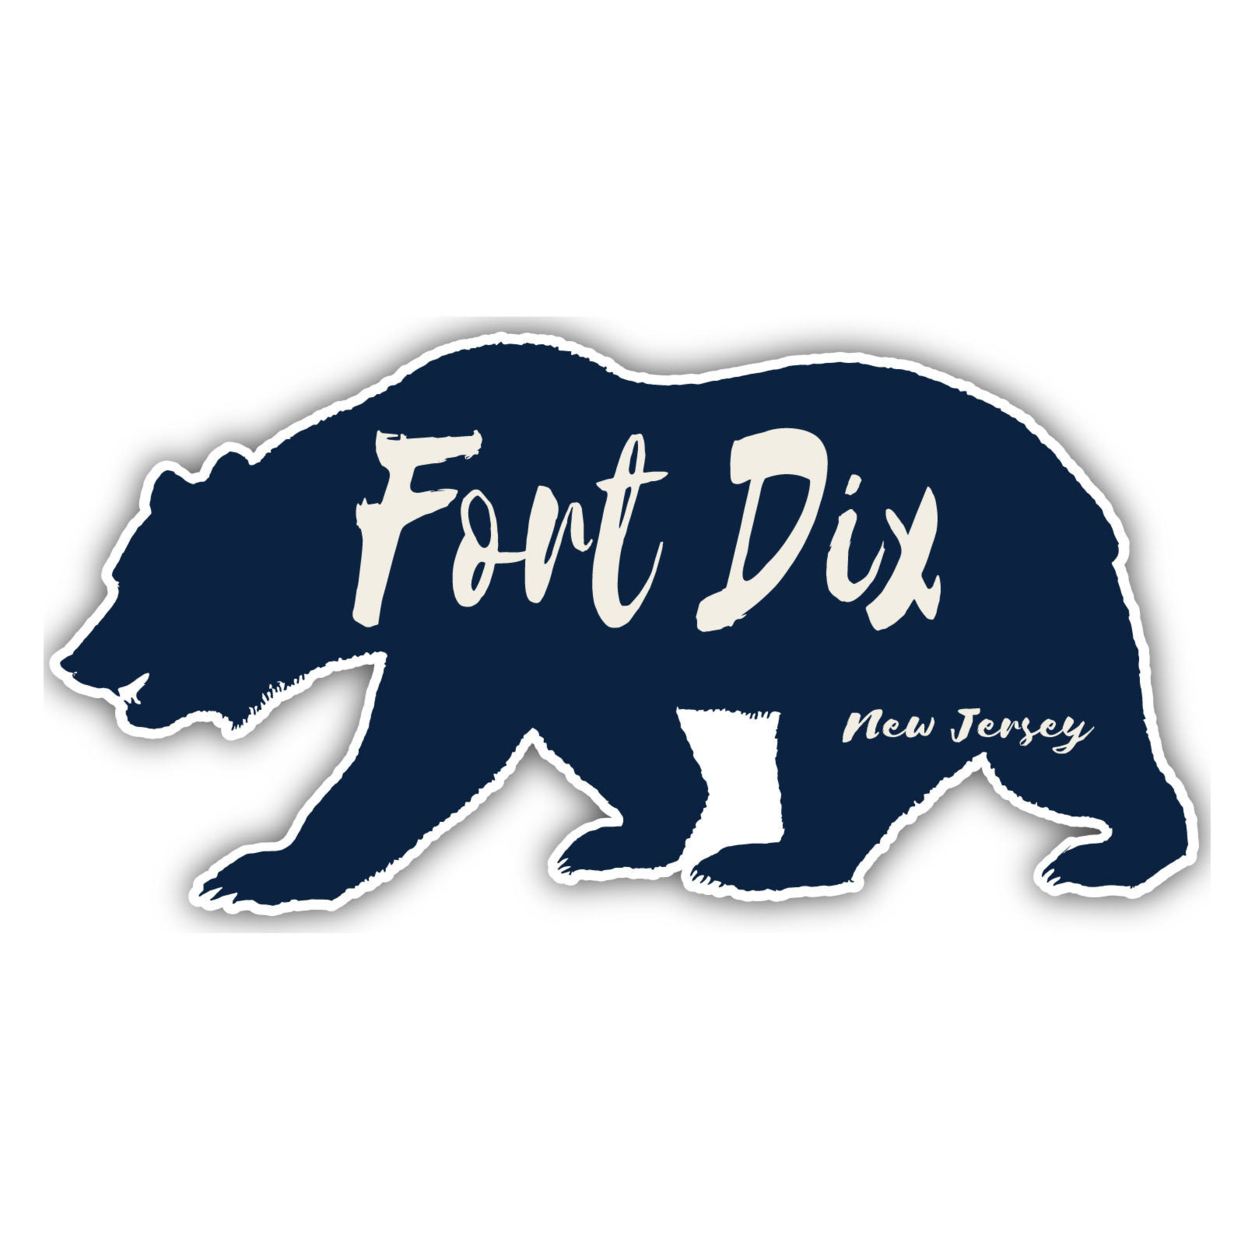 Fort Dix New Jersey Souvenir Decorative Stickers (Choose Theme And Size) - Single Unit, 8-Inch, Great Outdoors